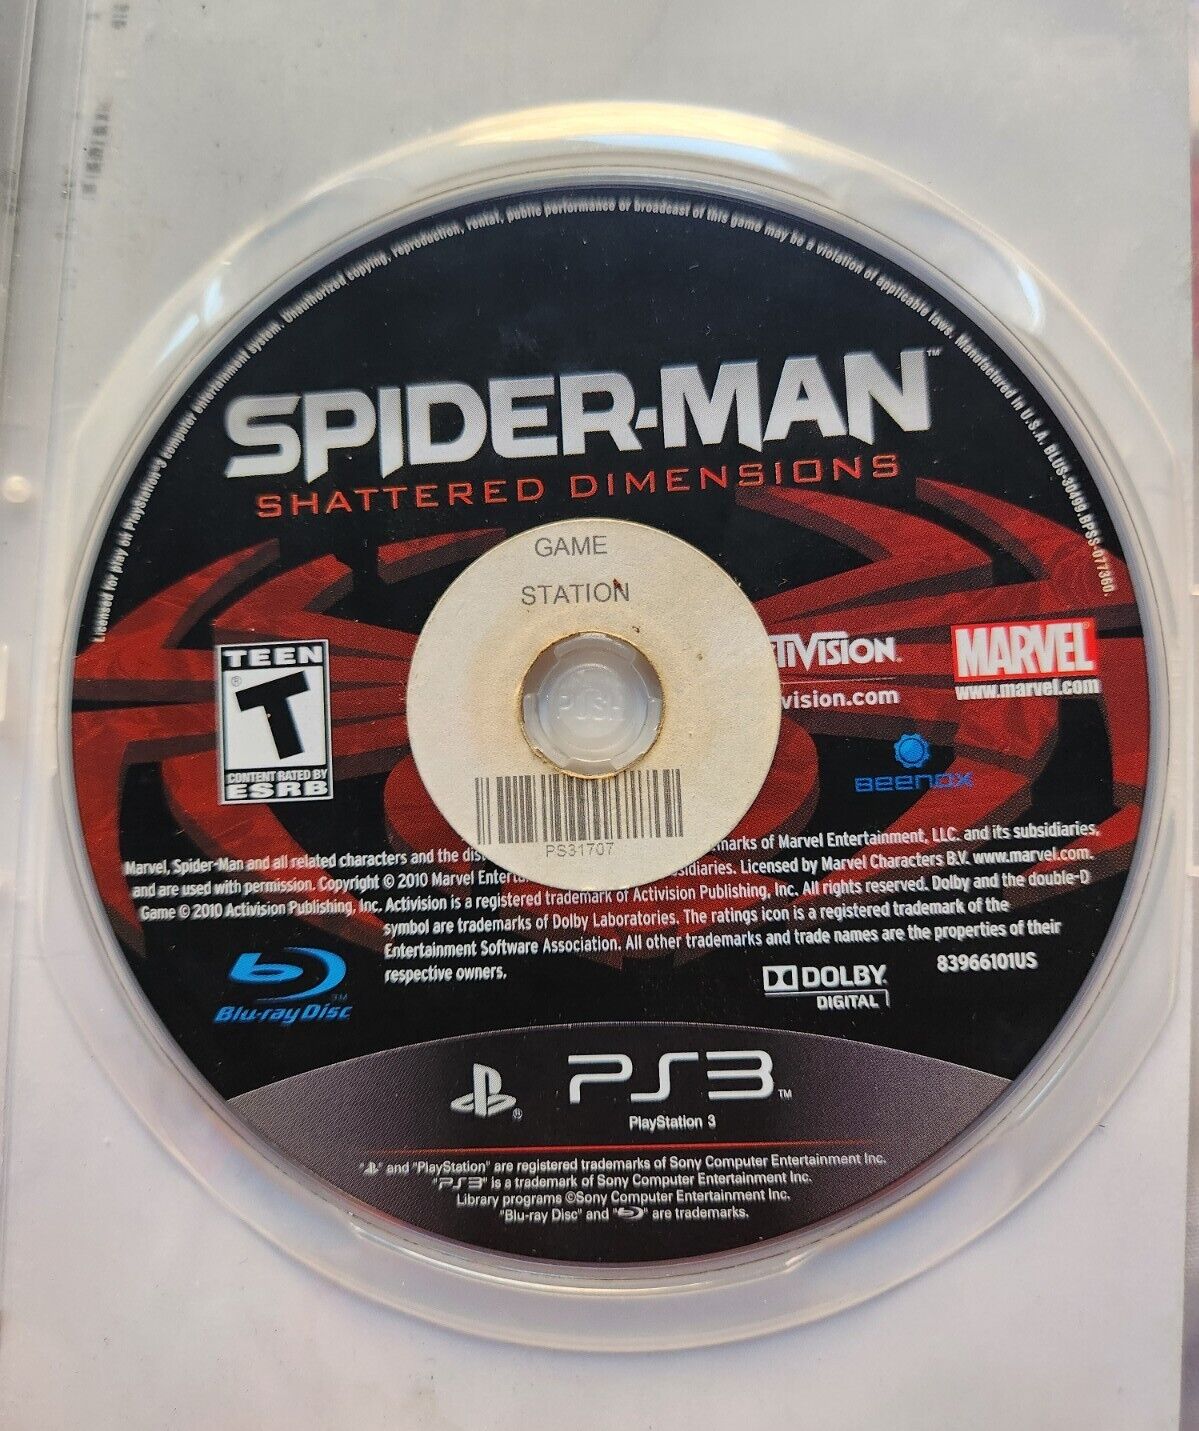 Spider-Man Shattered Dimensions Game Sony PlayStation 3 PS3 Disc Only 